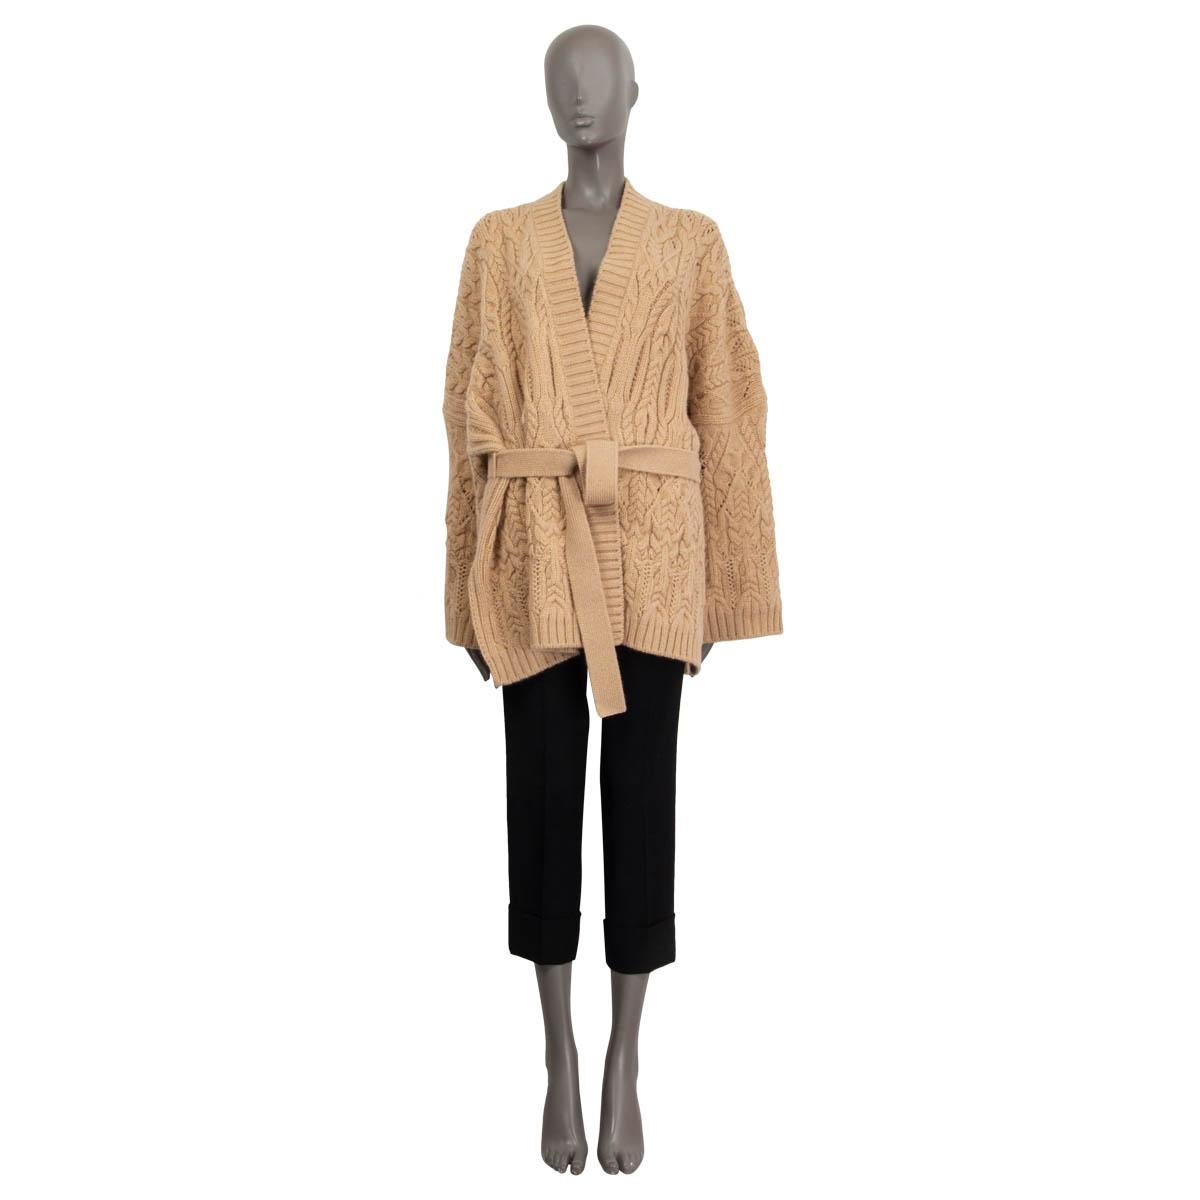 100% authentic Loro Piana 'Finsbury' wrap cardigan in sand cashmere (100%). Features a combination of ribbed and cable-knit elements and a self-tie belt. Unlined. Has been worn once and is in virtually new condition. 

Measurements
Tag